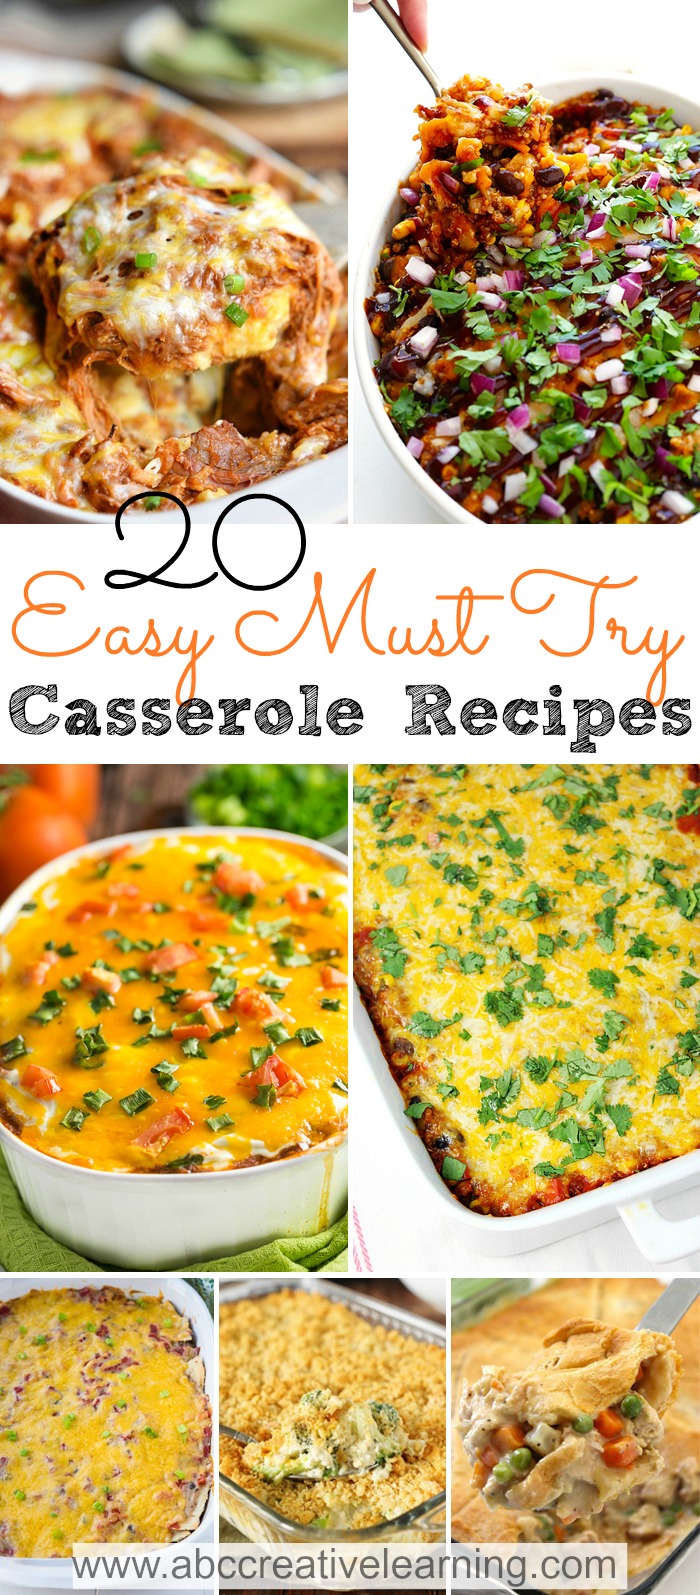 Check out these 20 Easy Must-Try Casserole Recipes to get your meal planning going for the week. - abccreativelearning.com